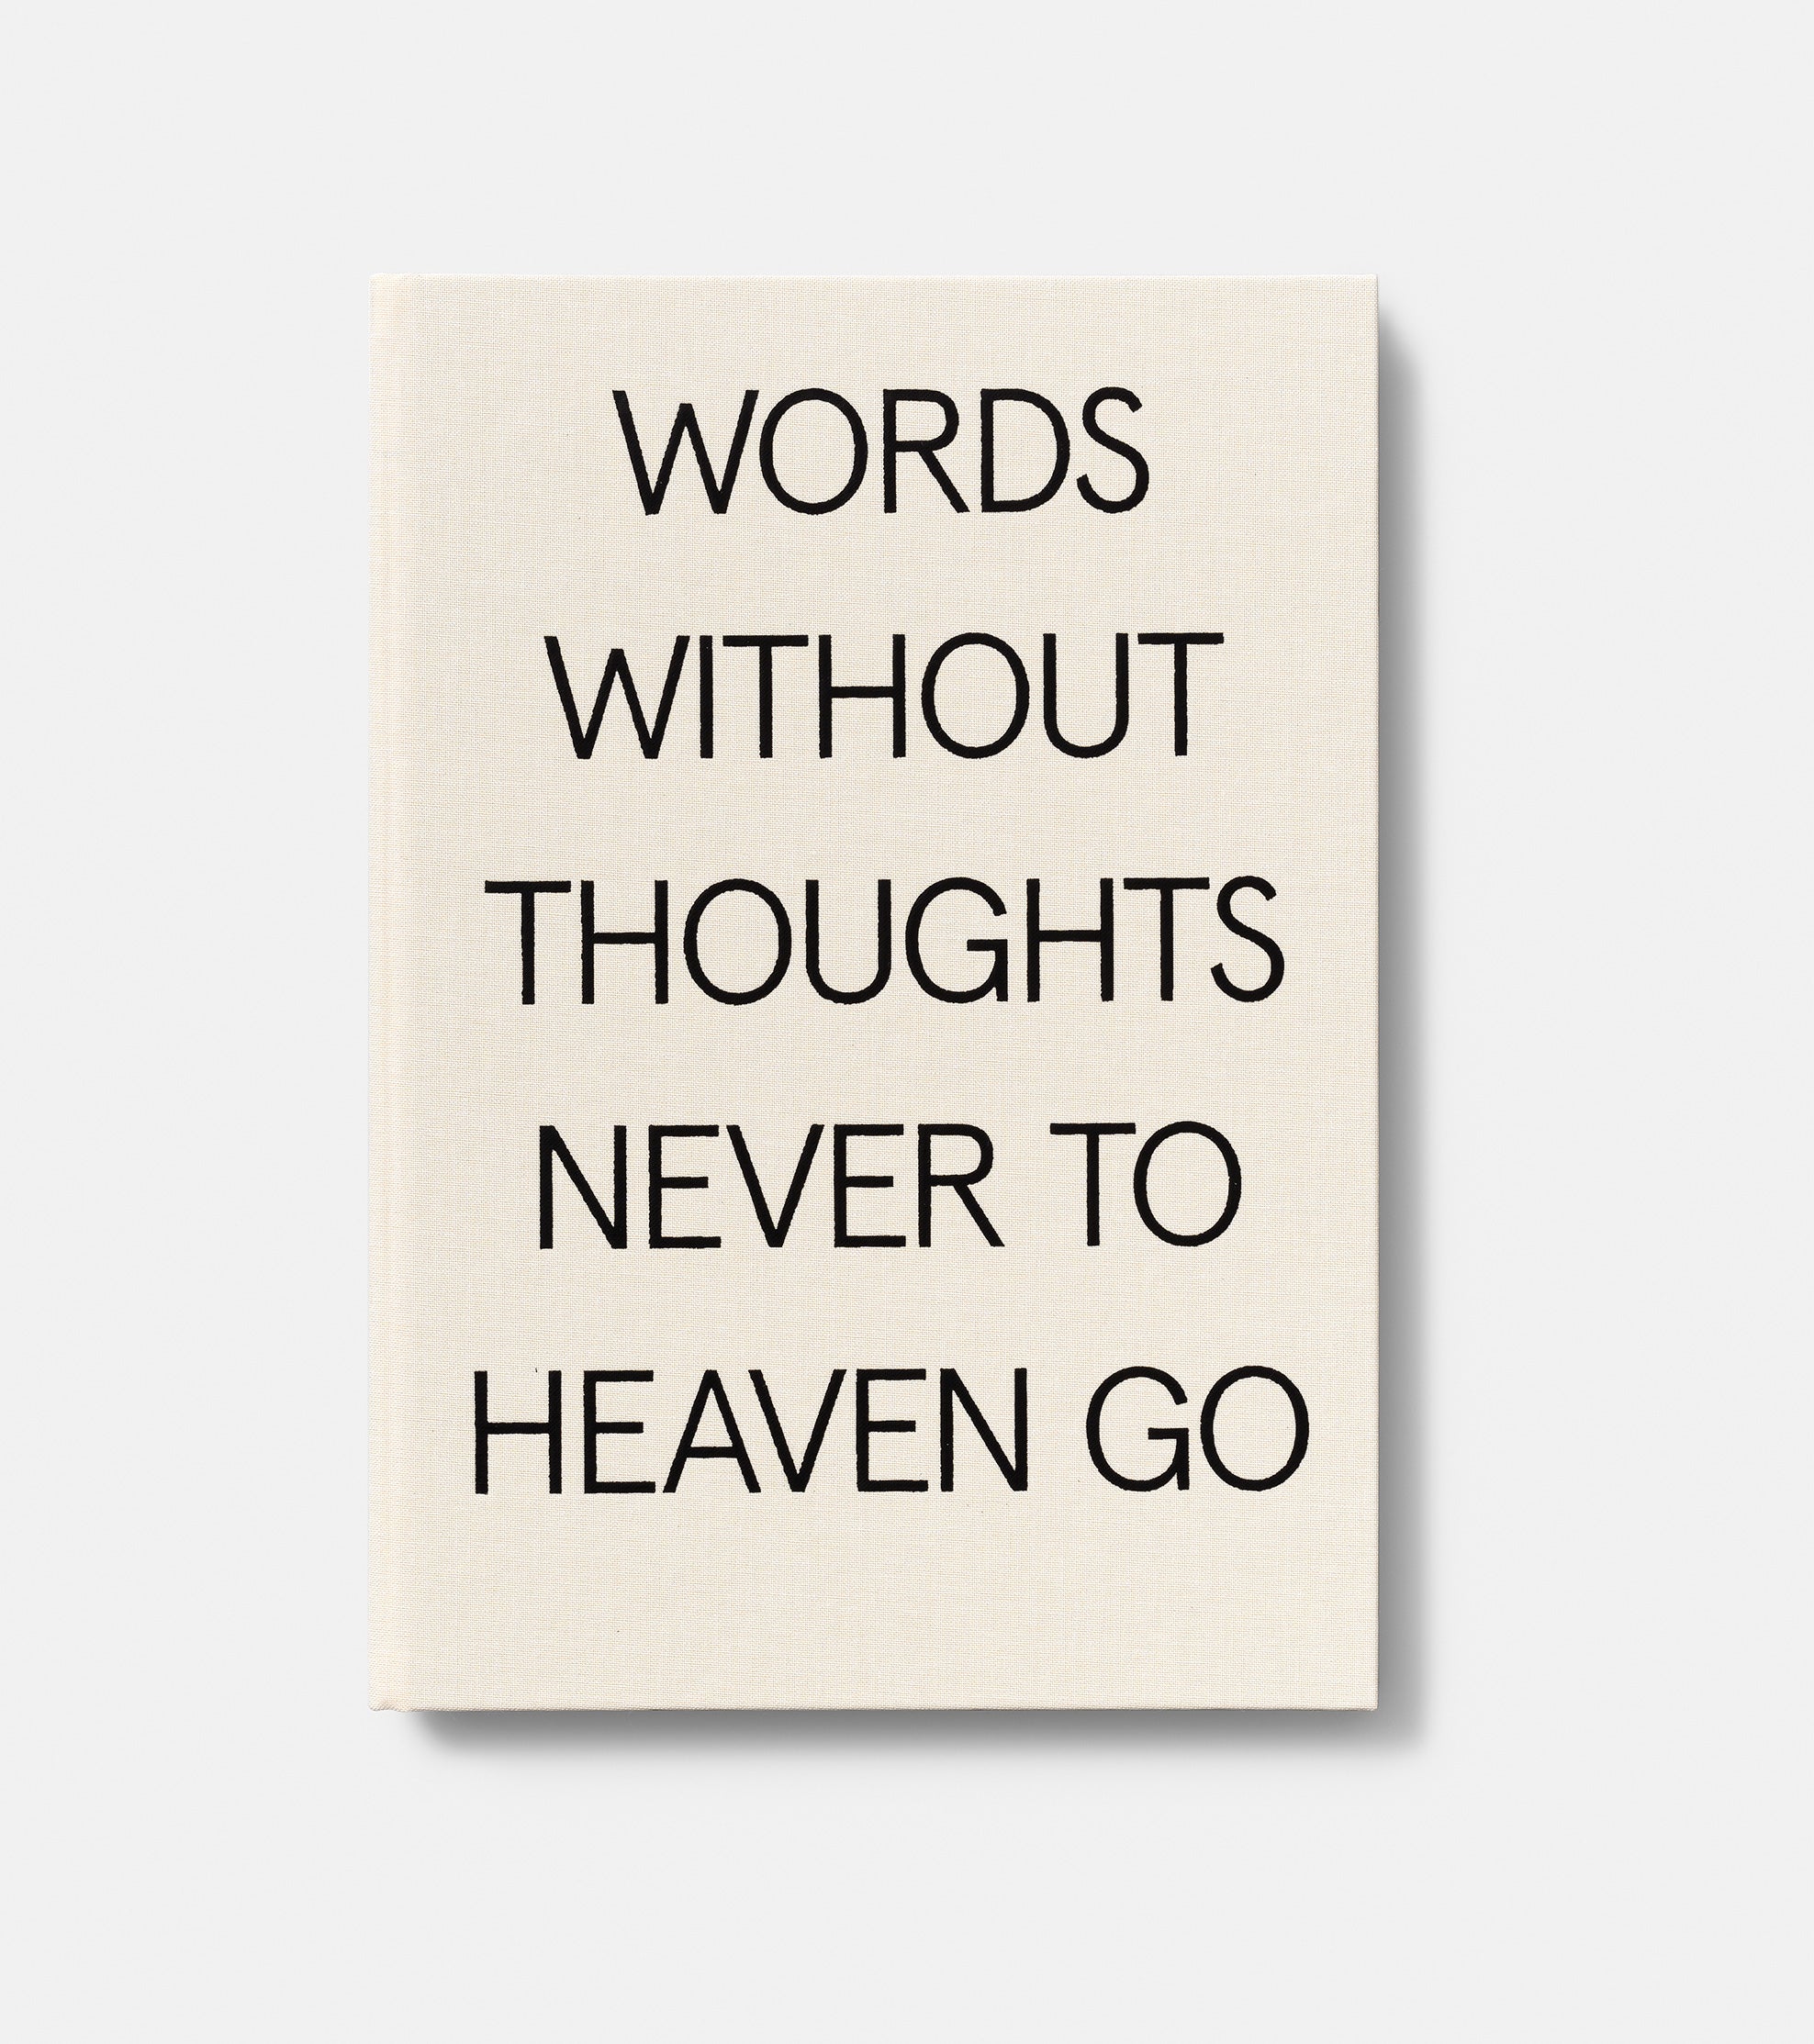 Words Without Thoughts Never to Heaven Go